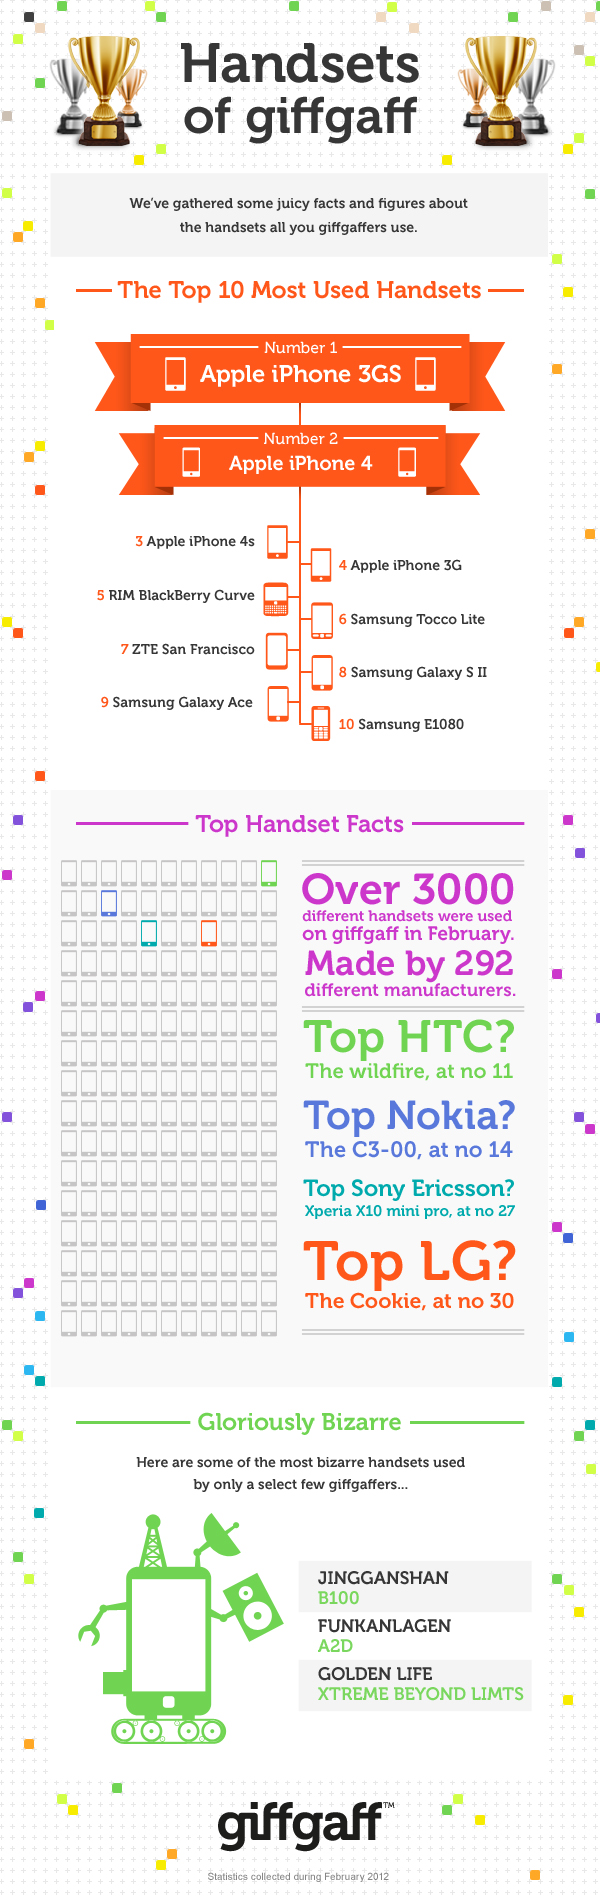 Inforgraphic showing the top handsets on Giffgaff